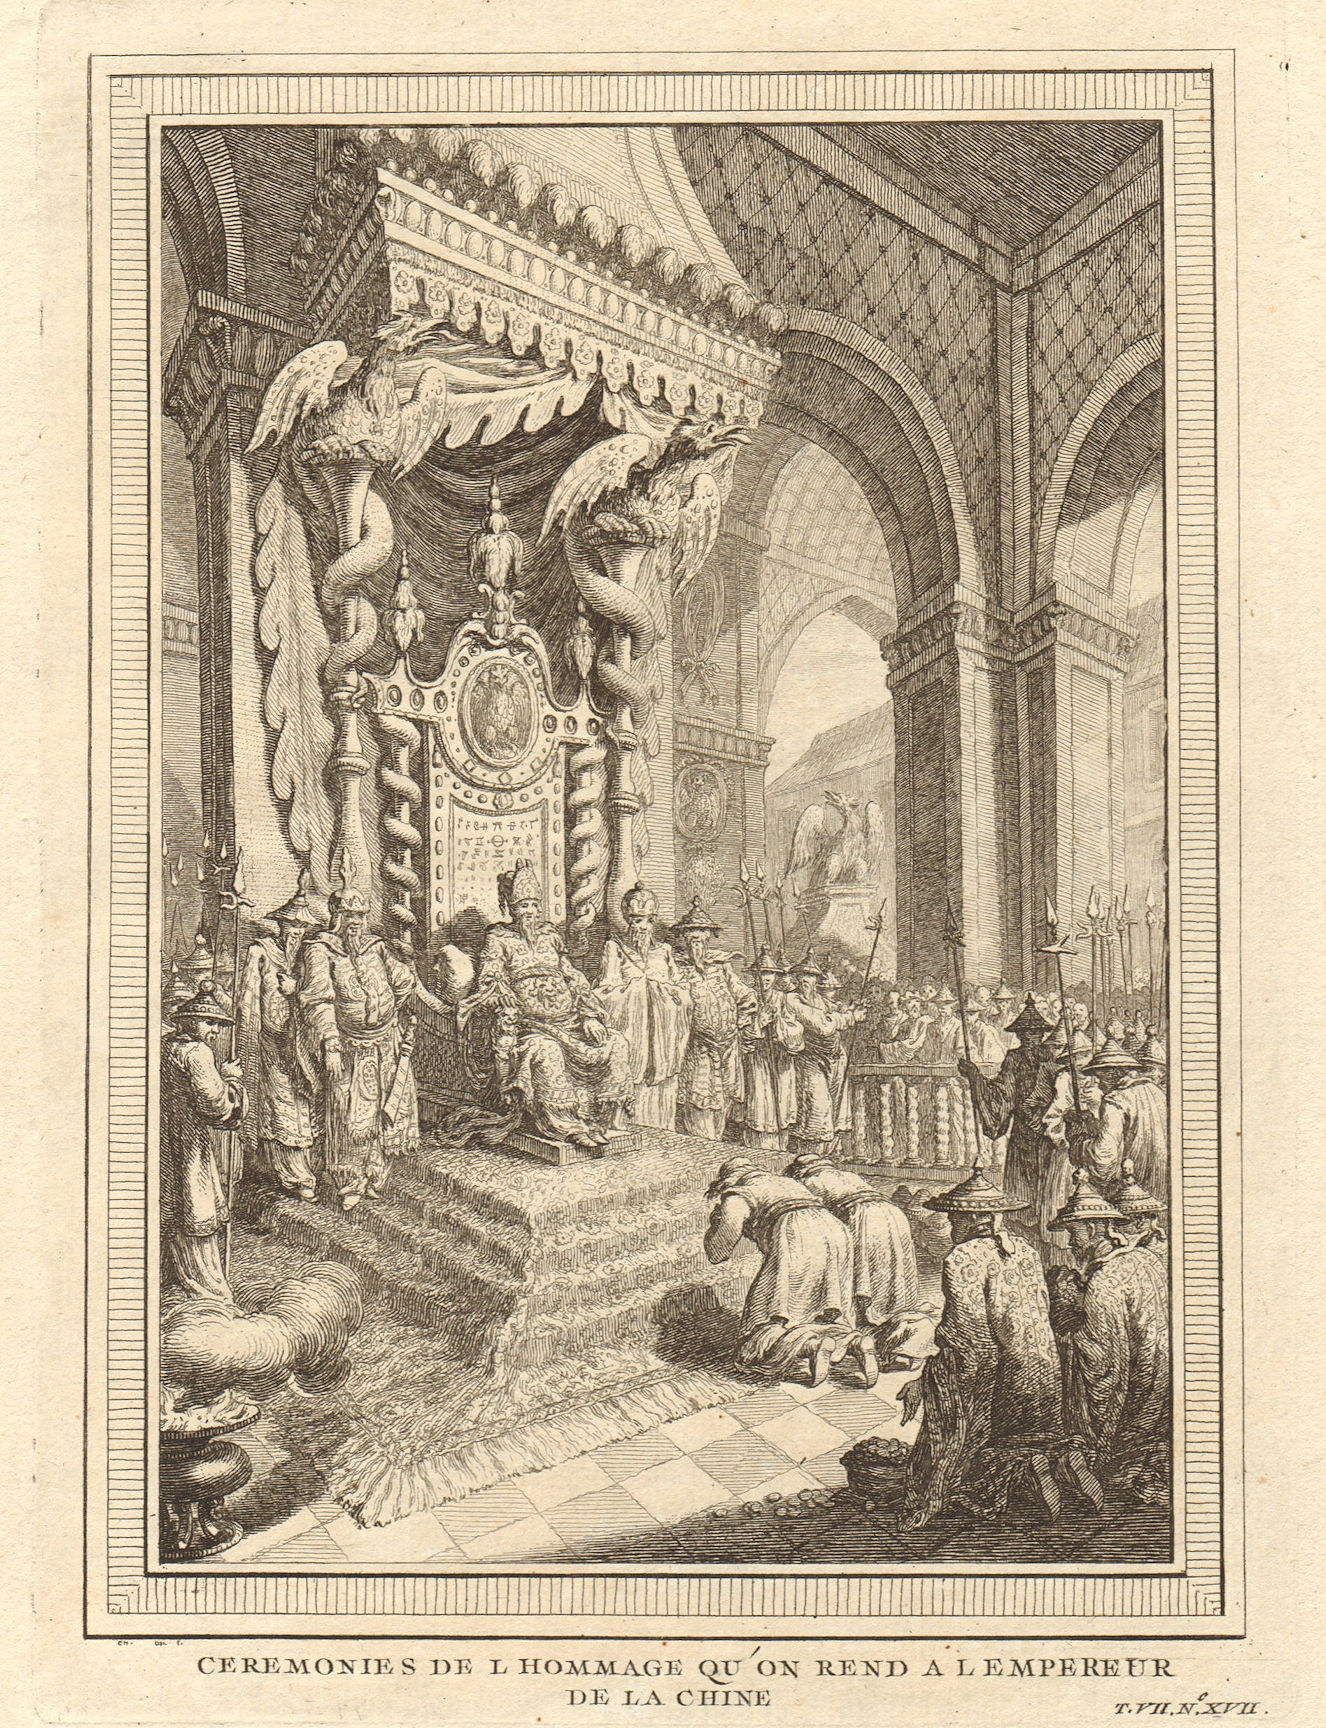 Associate Product 'Ceremonies de l’Hommage'. Paying homage to the Emperor of China 1749 print